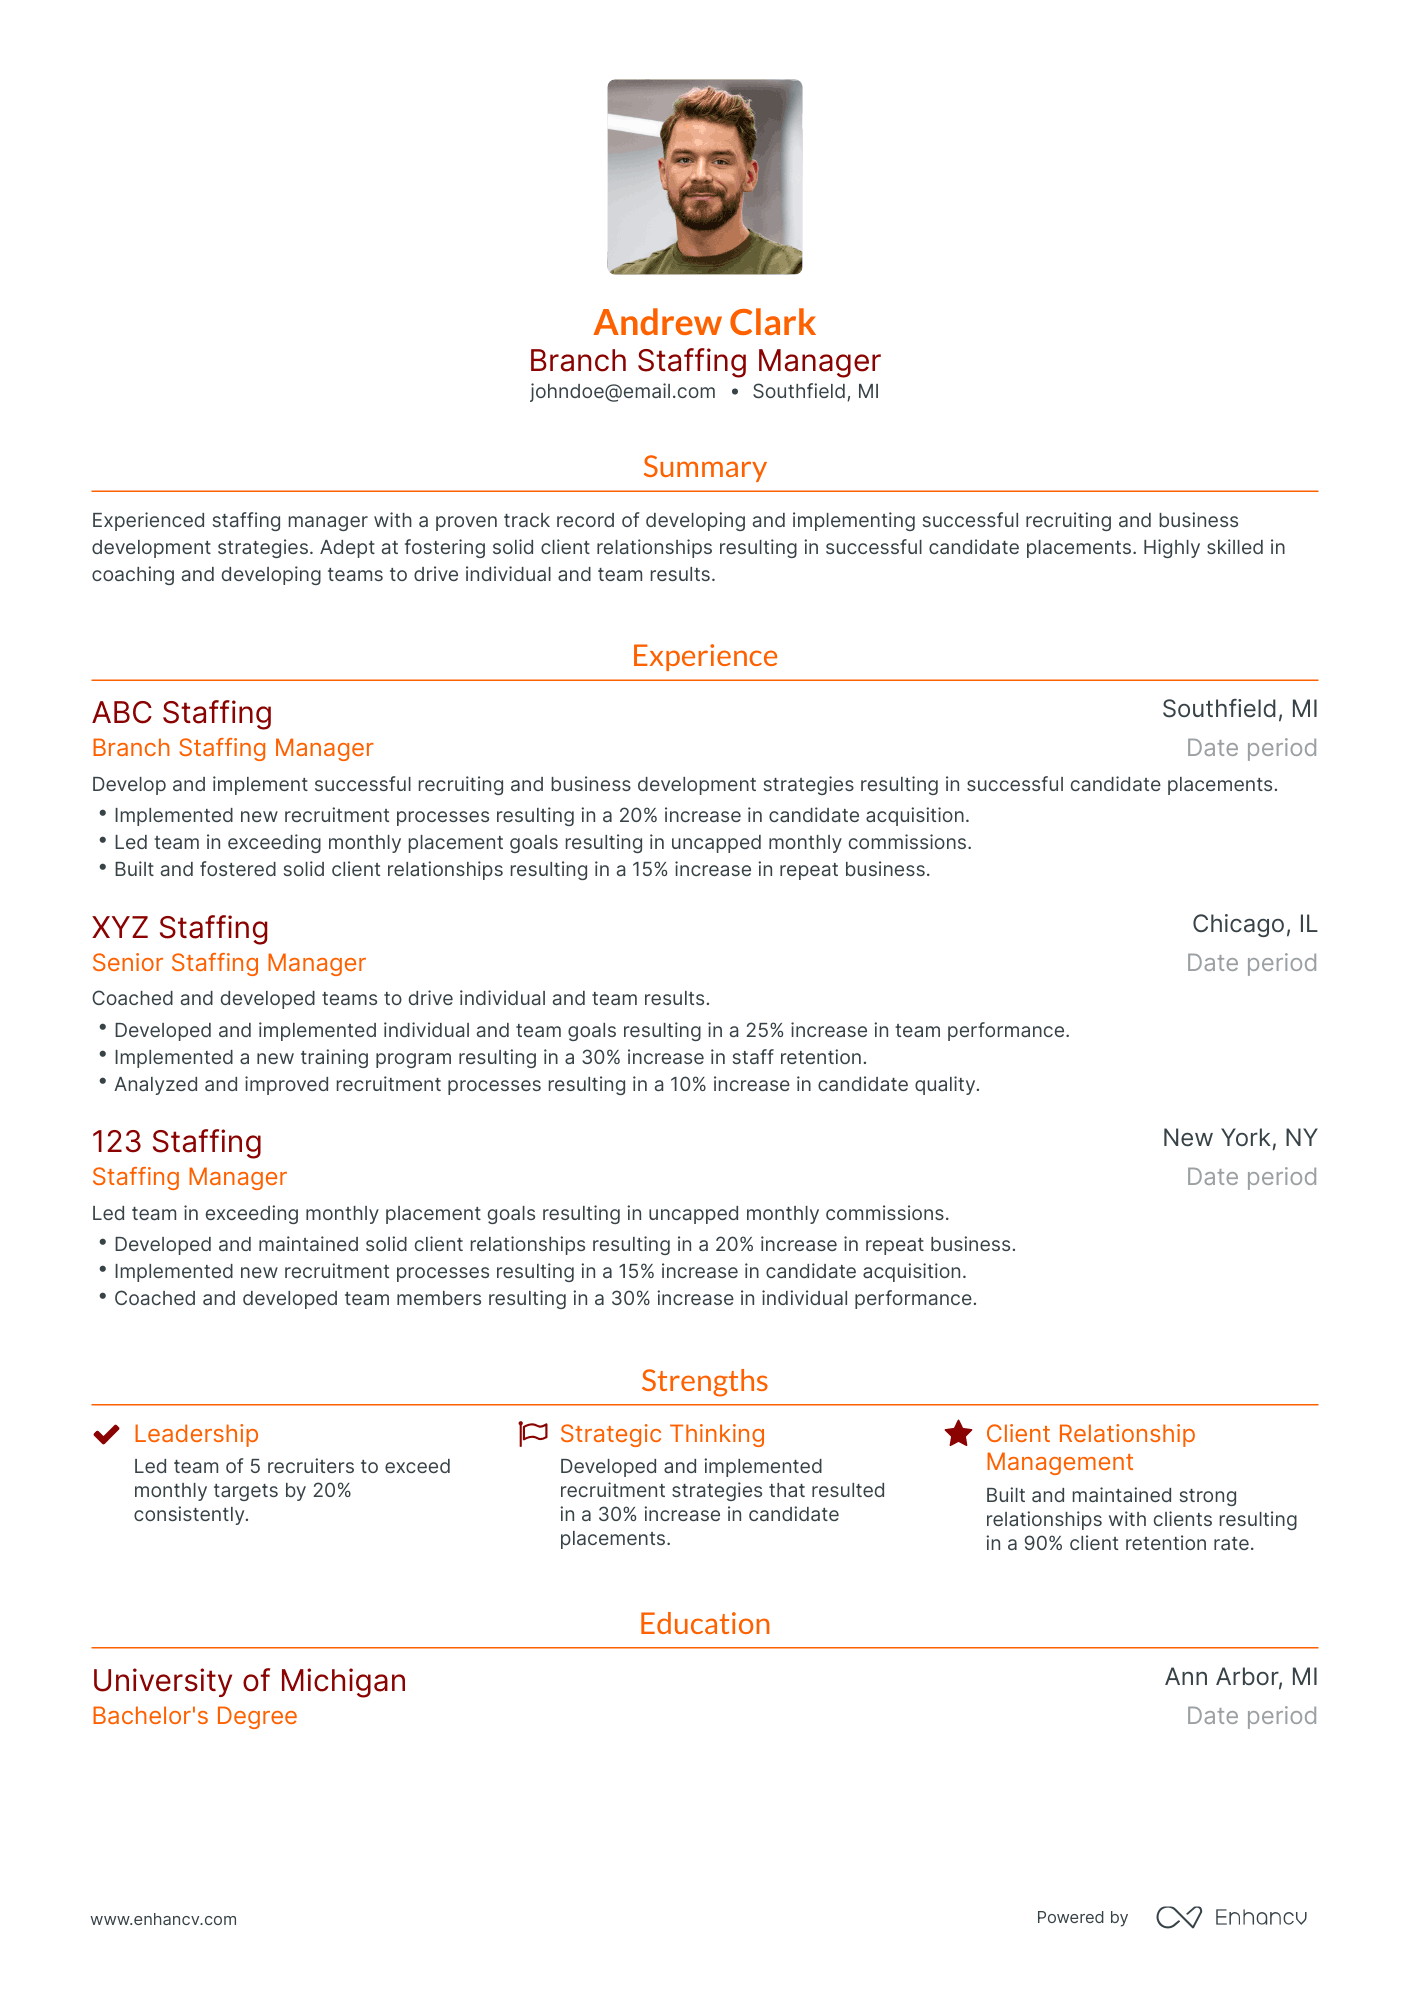 Traditional Staffing Manager Resume Template